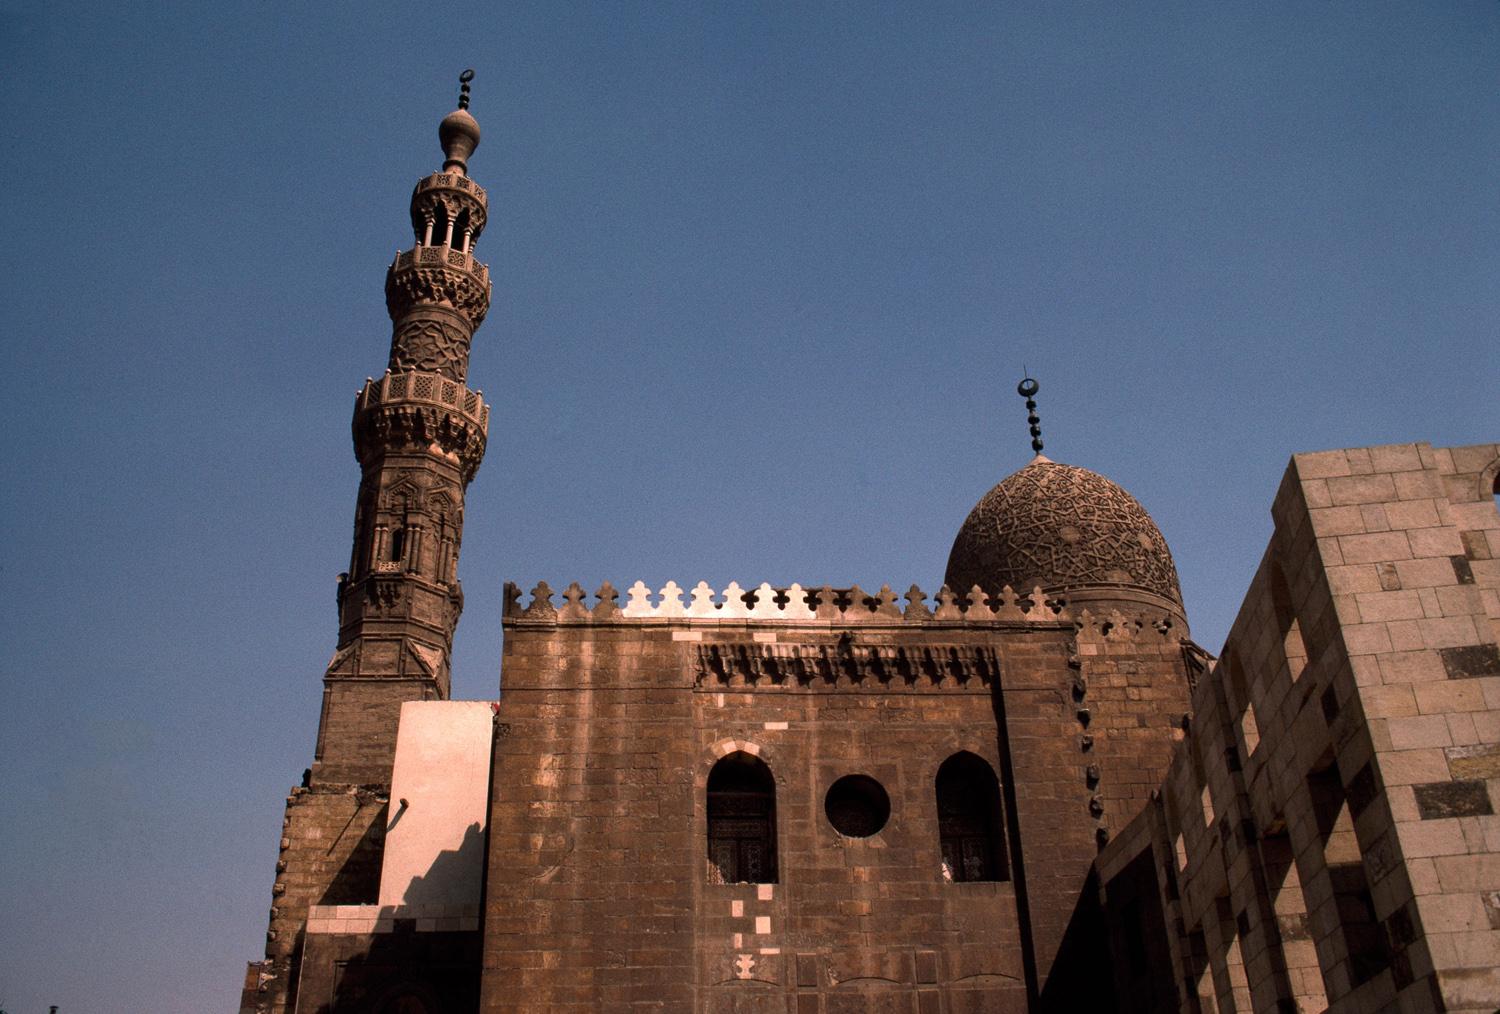 Upper zone, west façade of mosque and carved stone dome